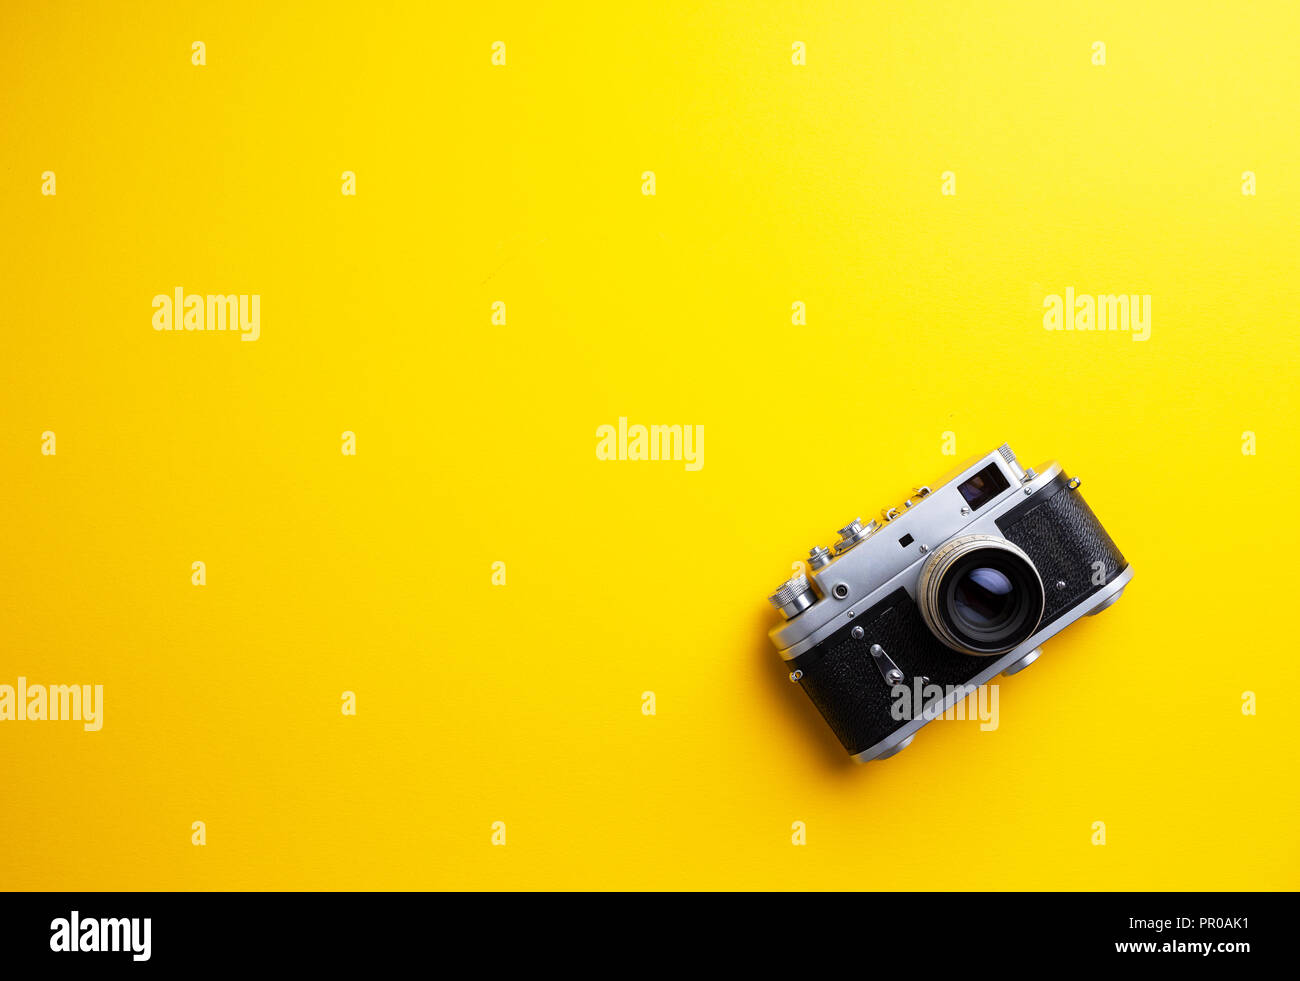 Vintage camera over yellow background with negative space Stock Photo